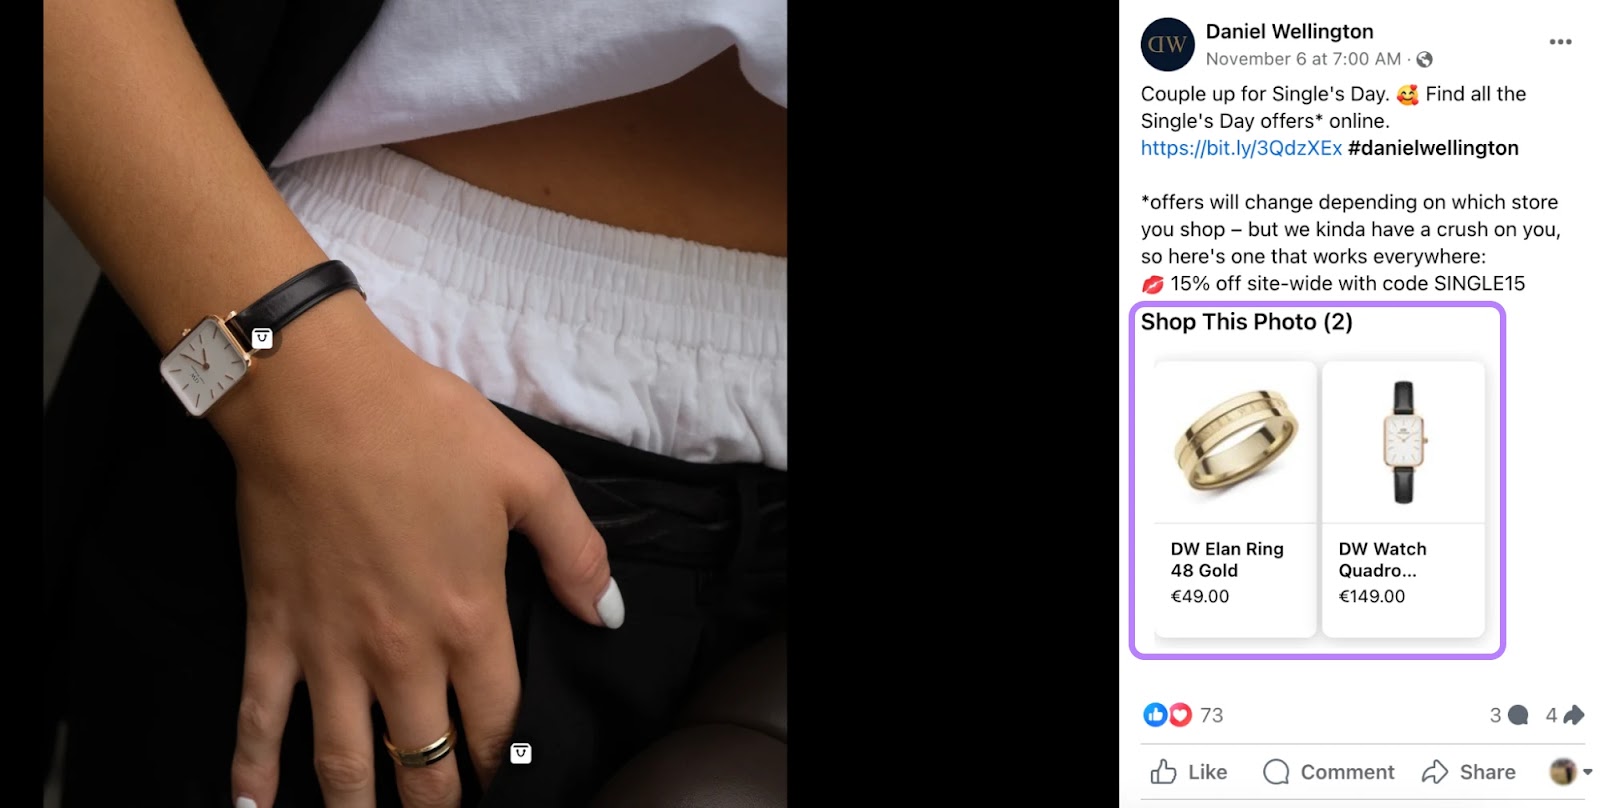 Daniel Wellington's Facebook post inviting followers to "shop this photo"